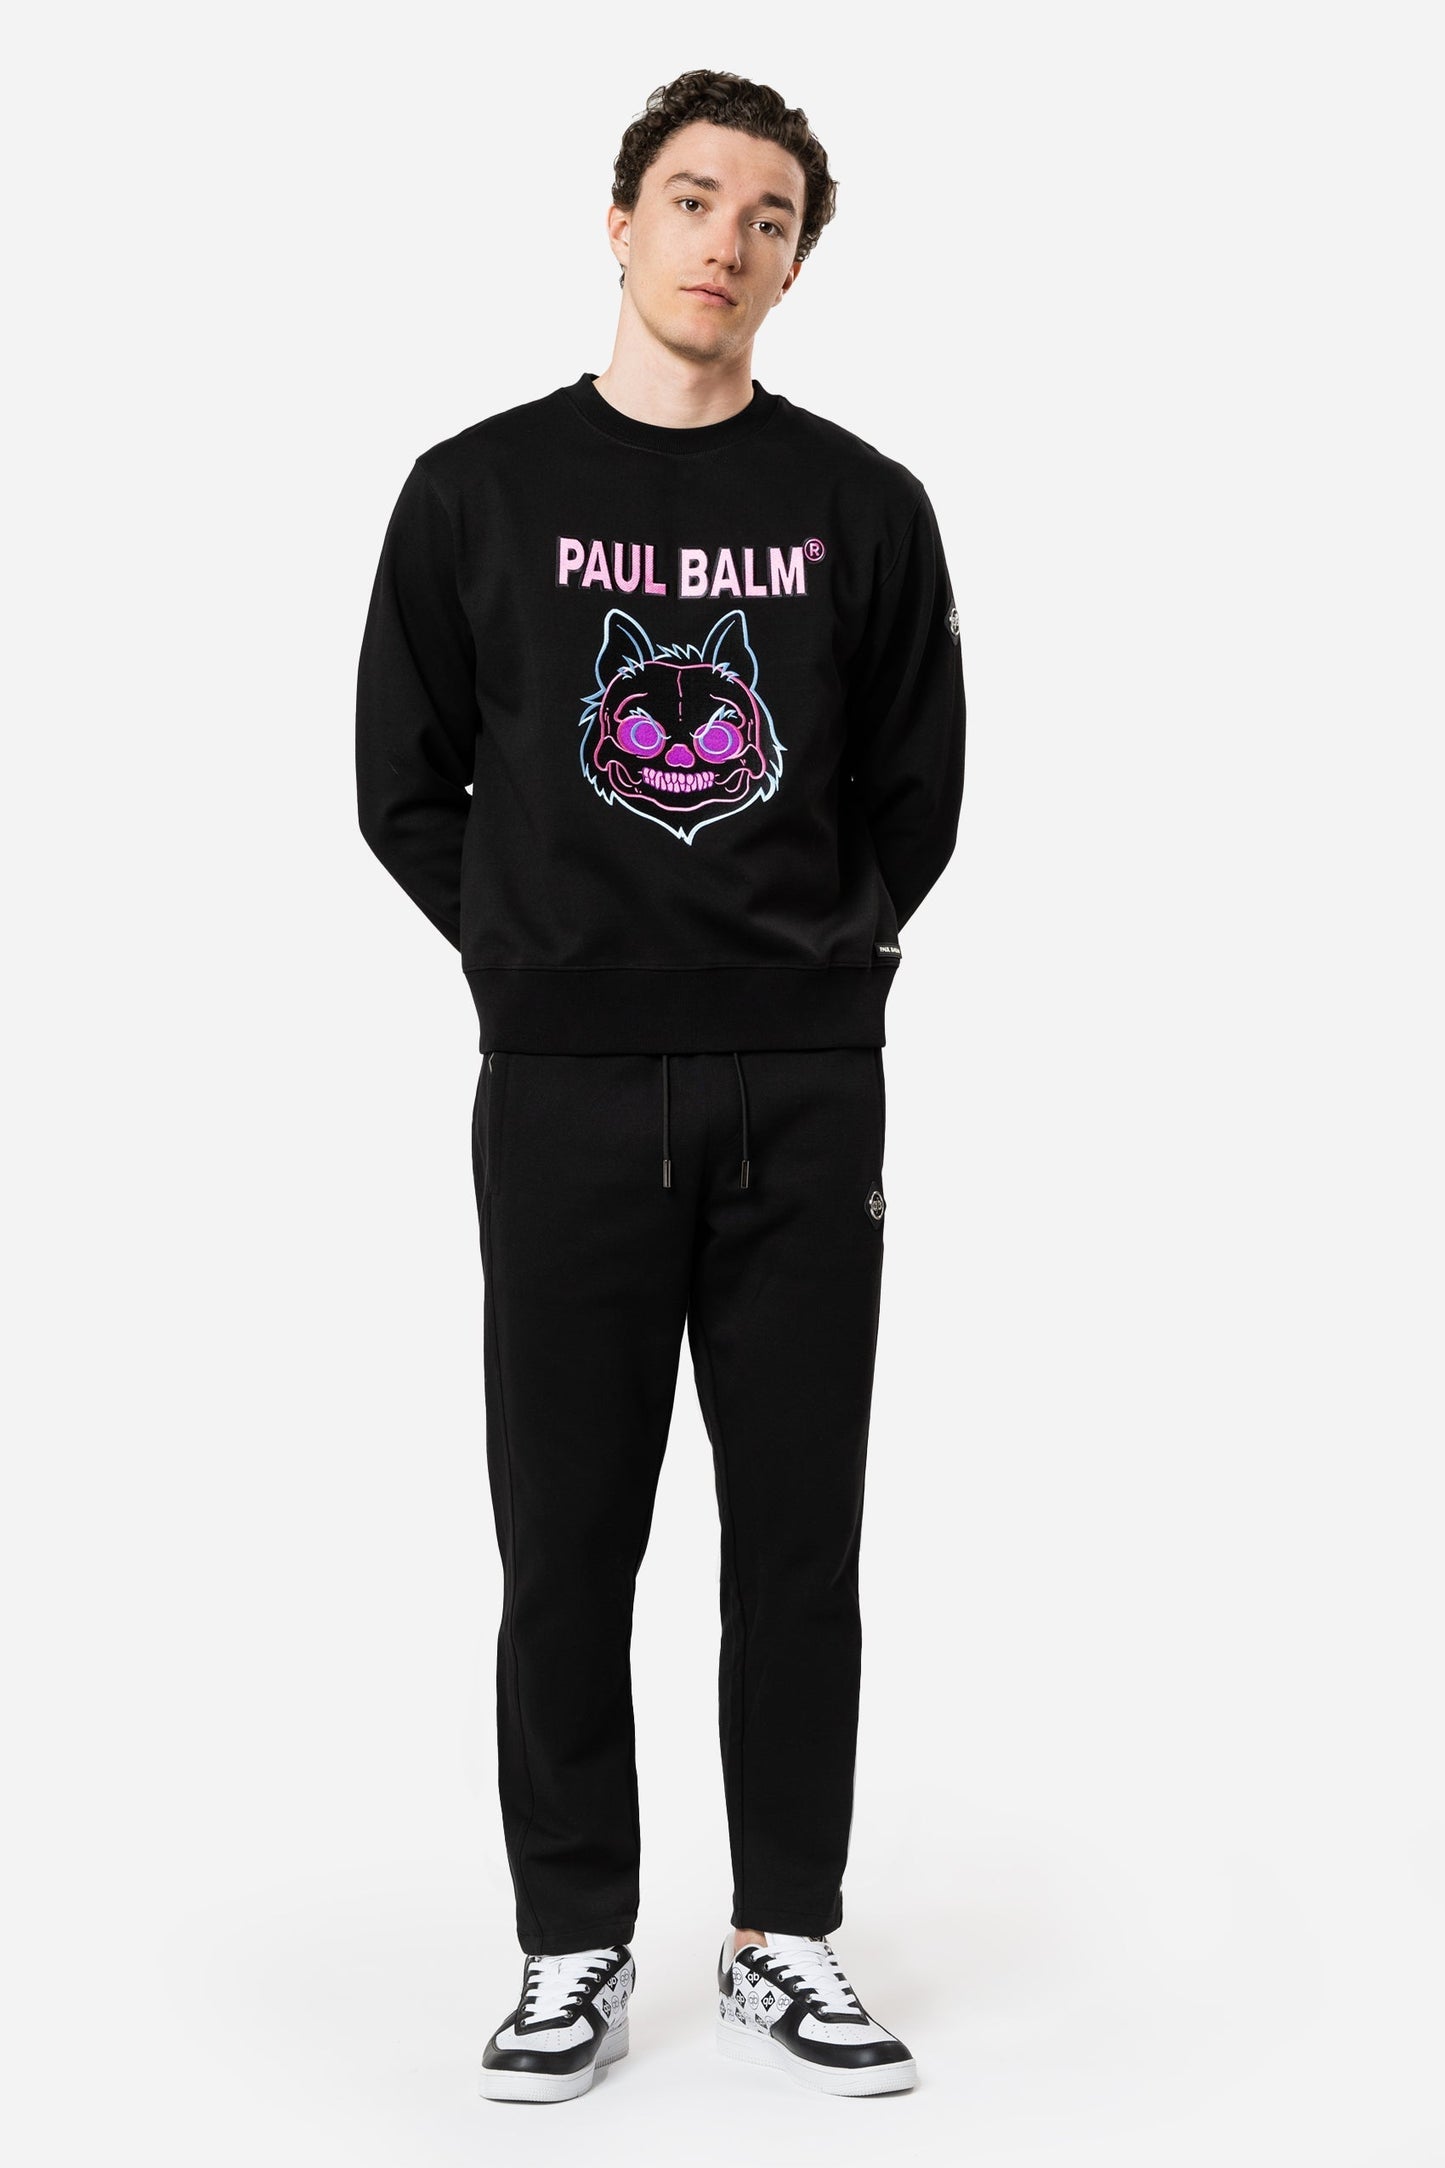 Embroidered X-Ray Sweatshirt - Limited to 300 - PAUL BALM WORLD